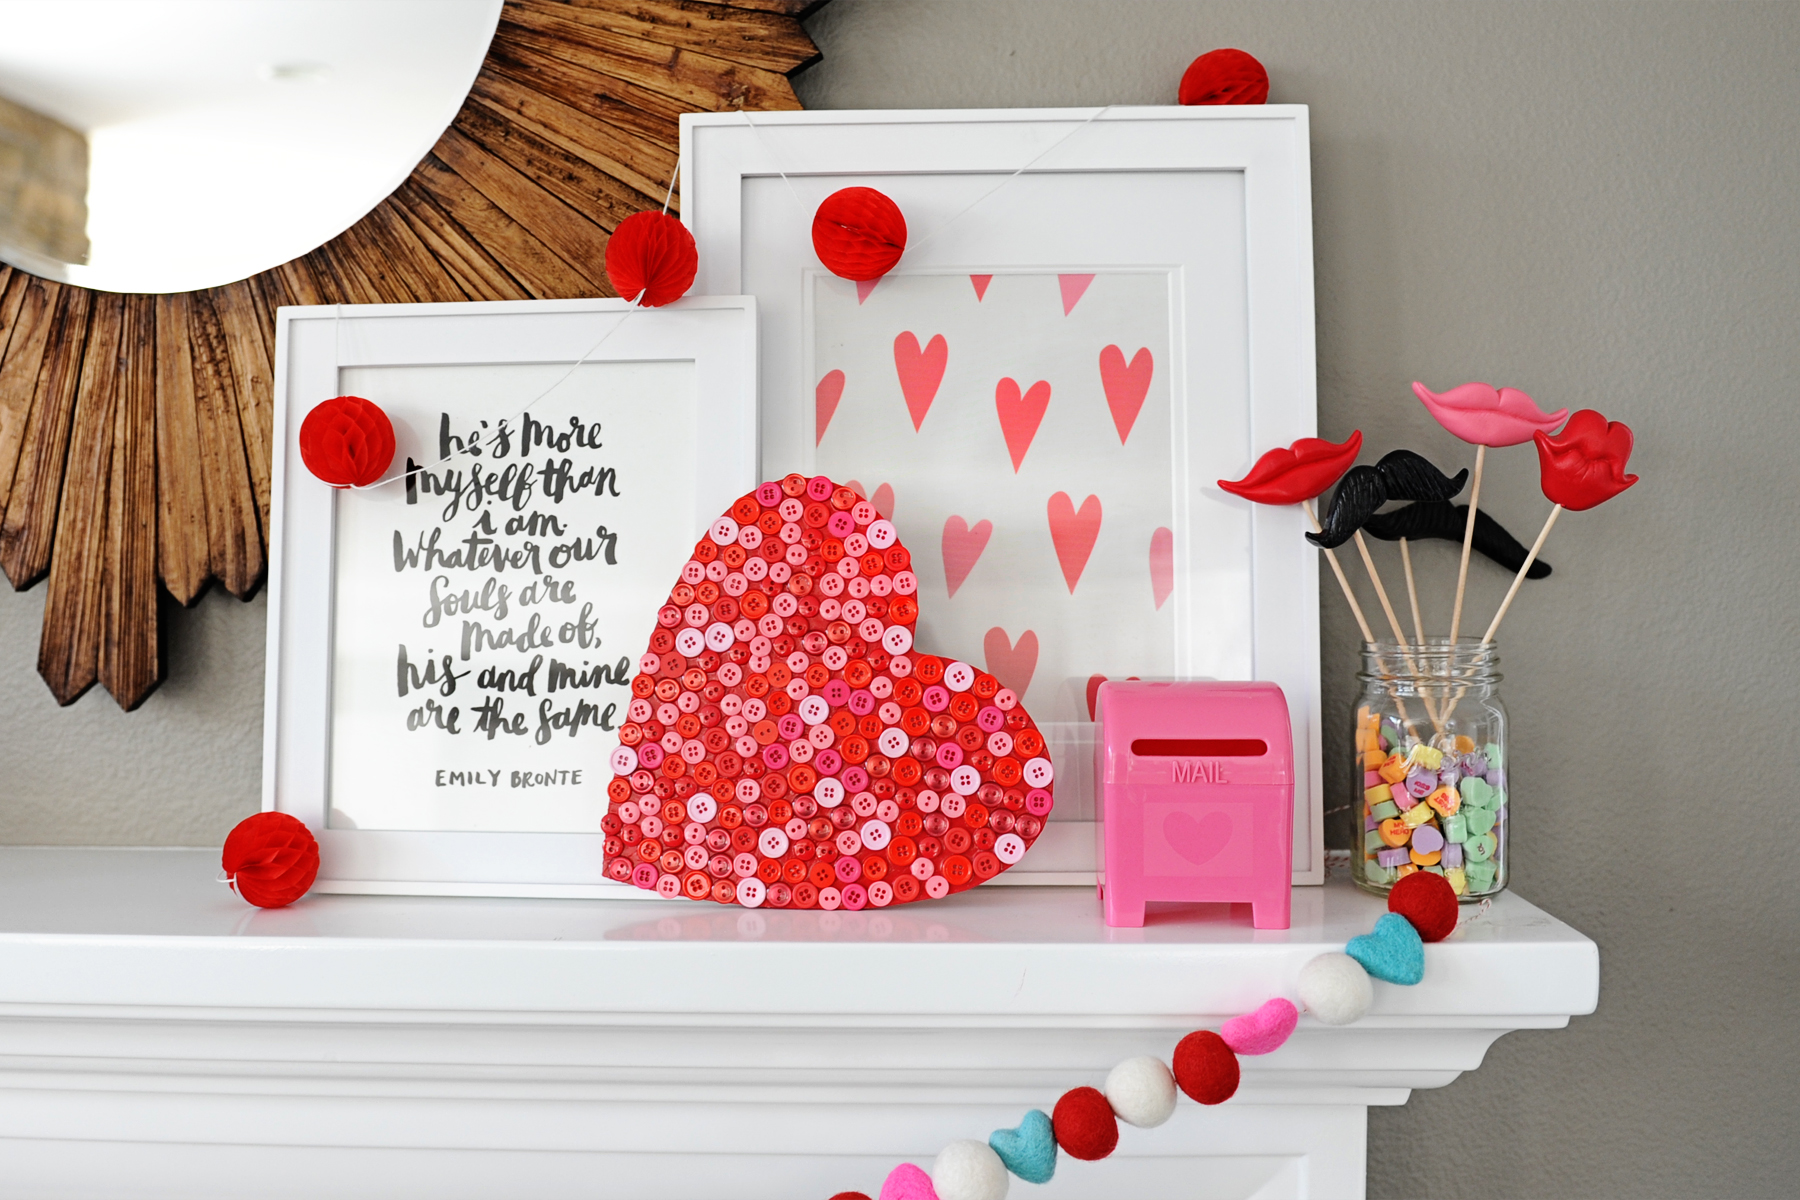 Cute As A Button Valentine Craft  What Can We Do With Paper And Glue